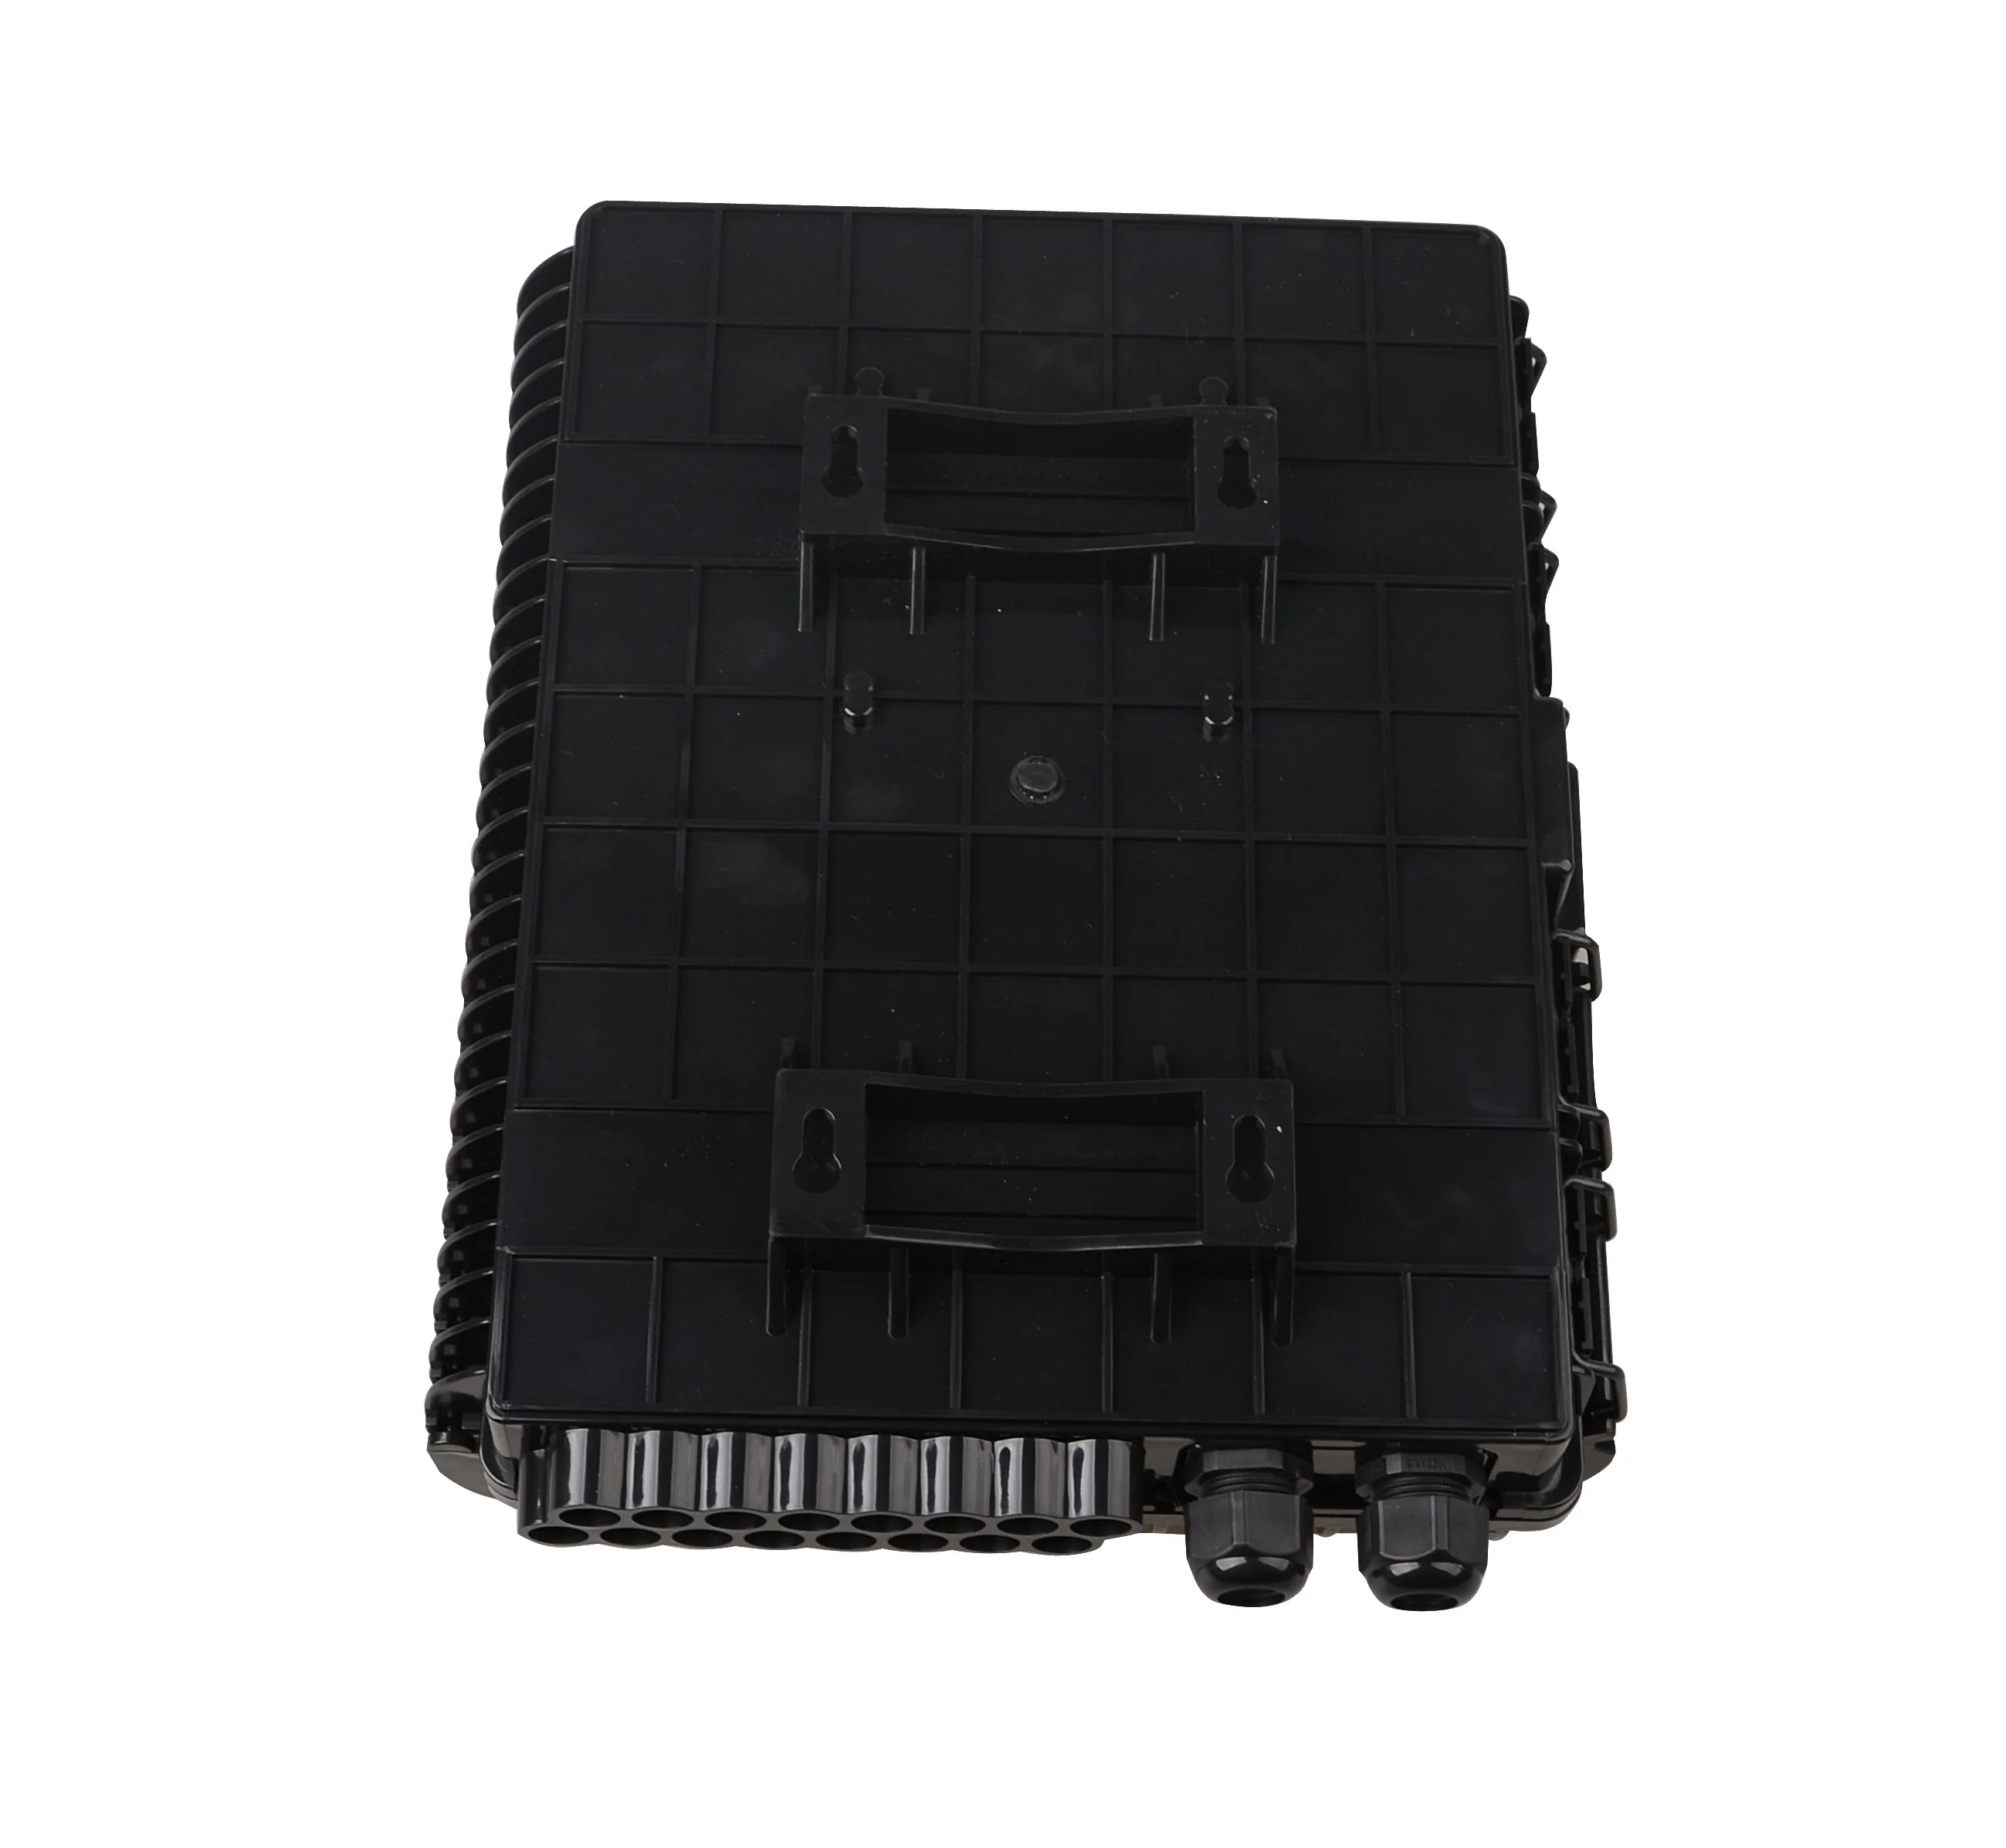 Outdoor Waterproof  Black Color  ABS Type  16 Cores Optical Cable  Distribution Box